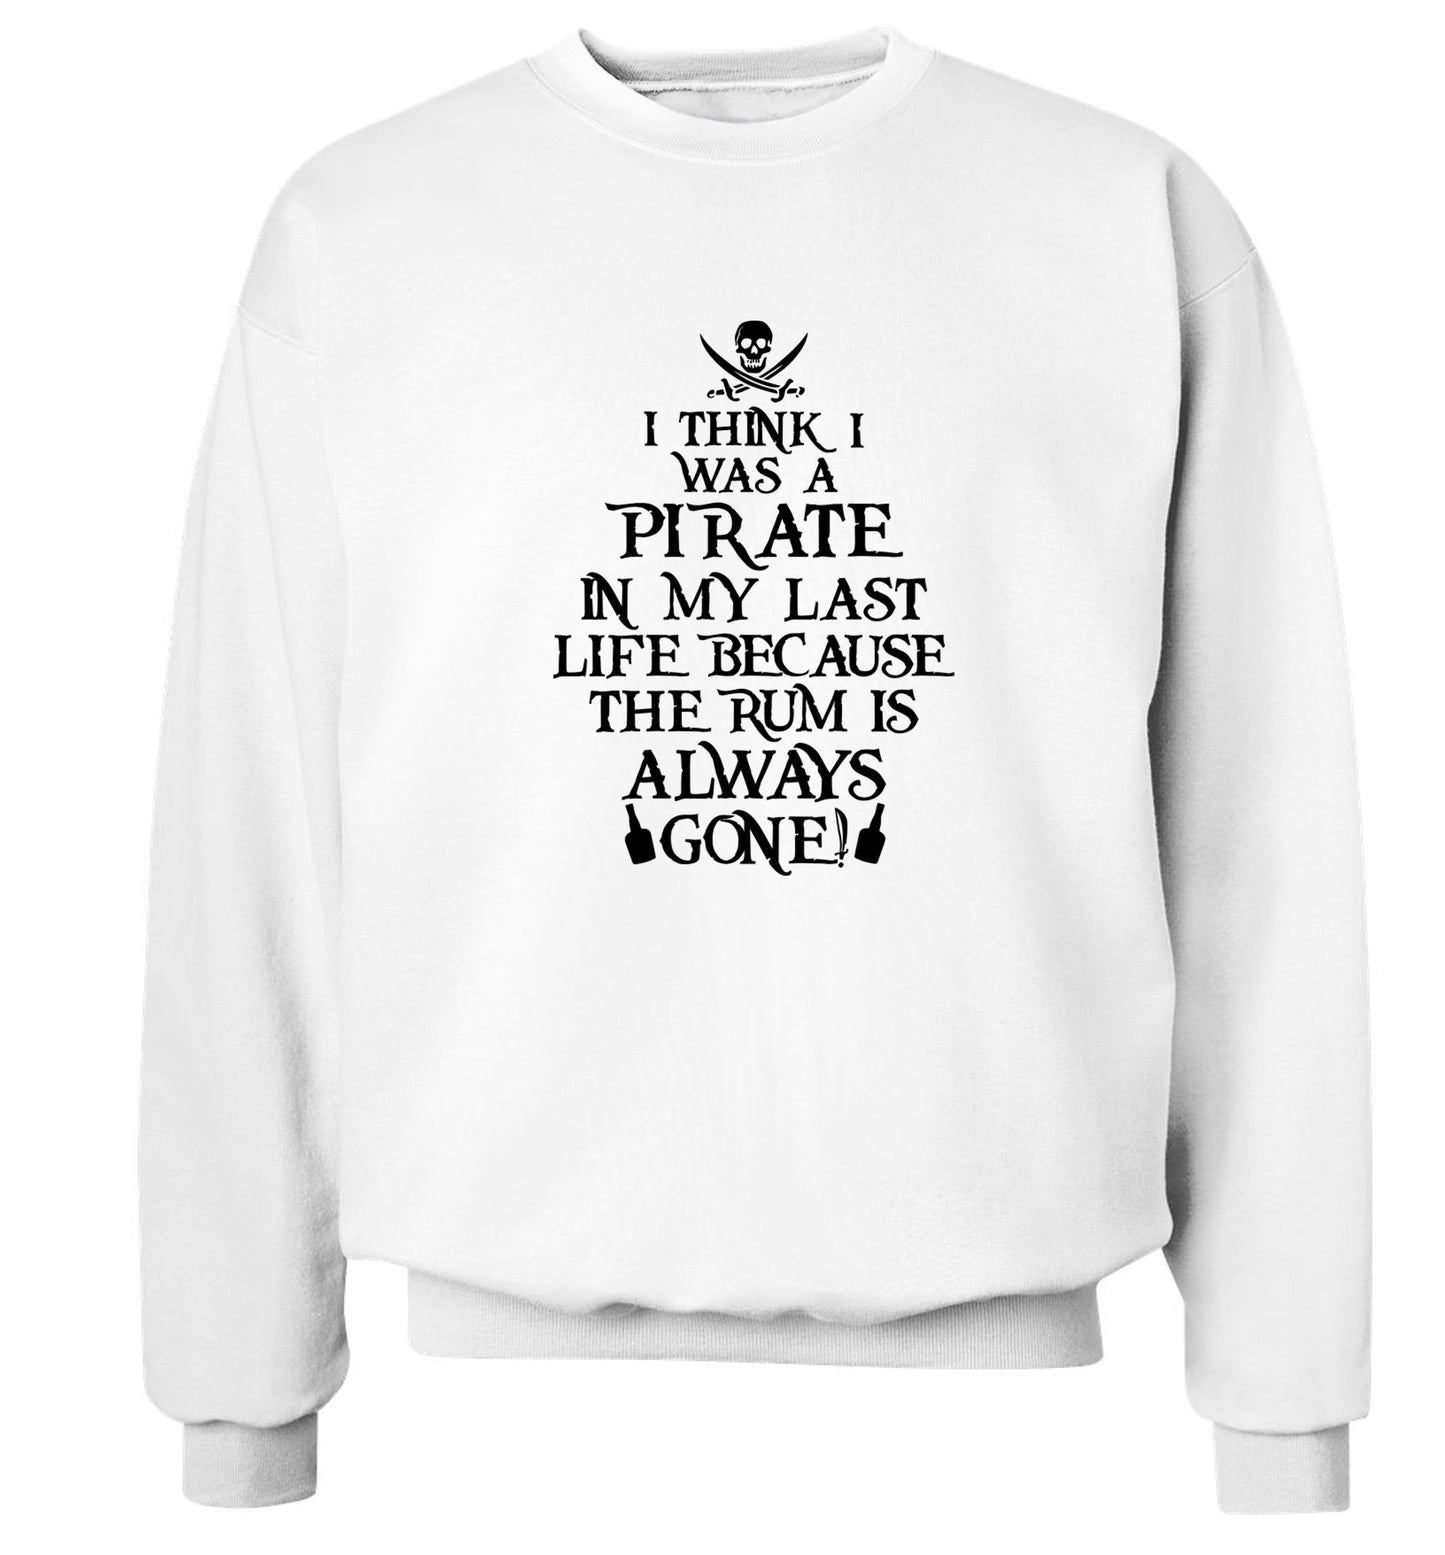 I think I was a pirate in my past life because the rum is always gone! Adult's unisex white Sweater 2XL